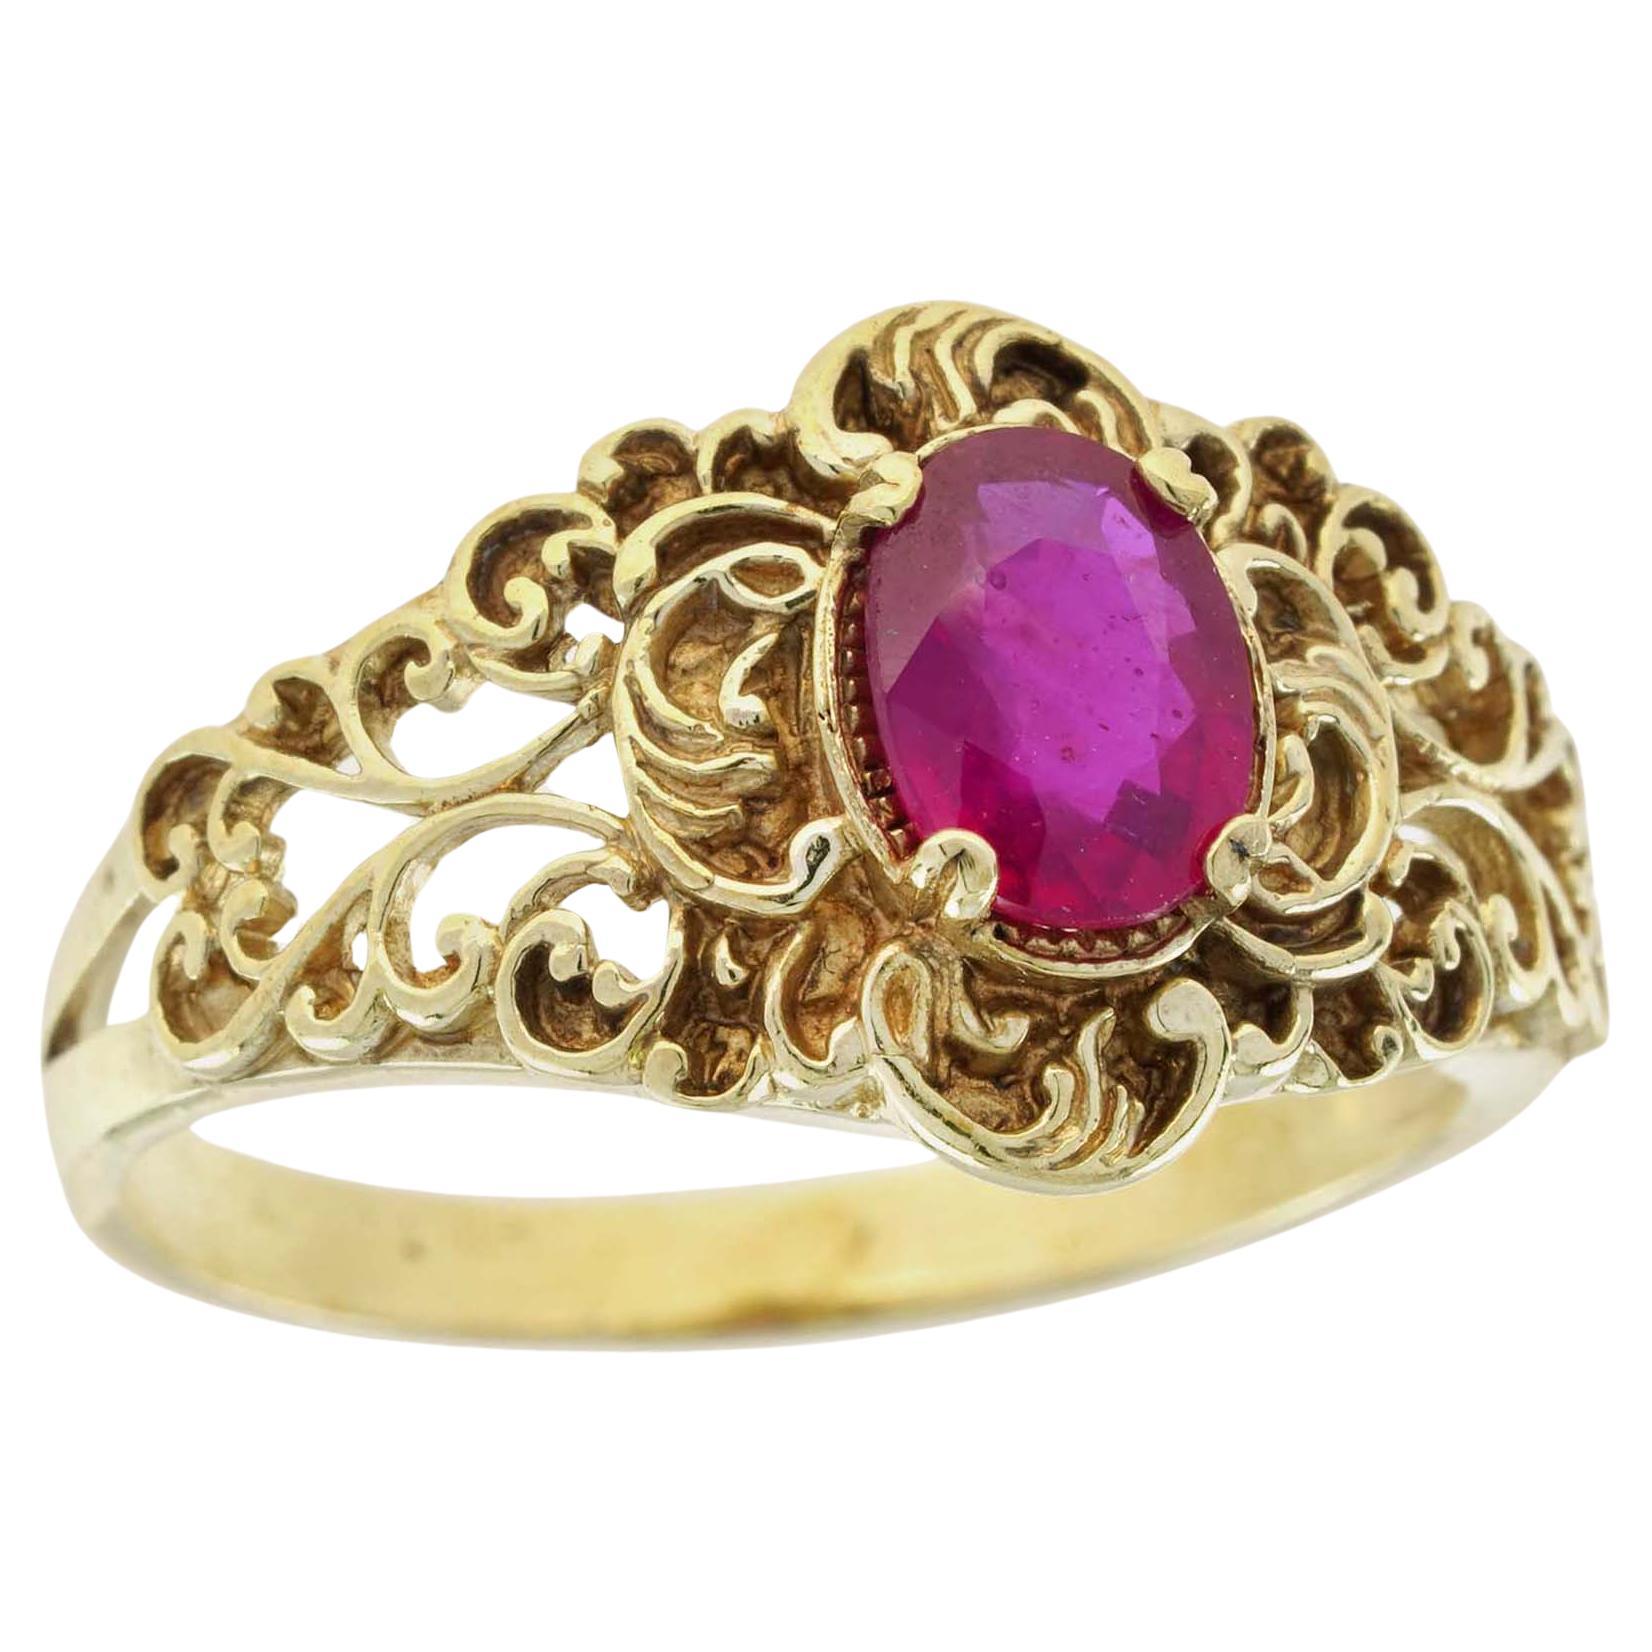 Natural Ruby Vintage Style Floral Filigree Ring in Solid 9K Yellow Gold